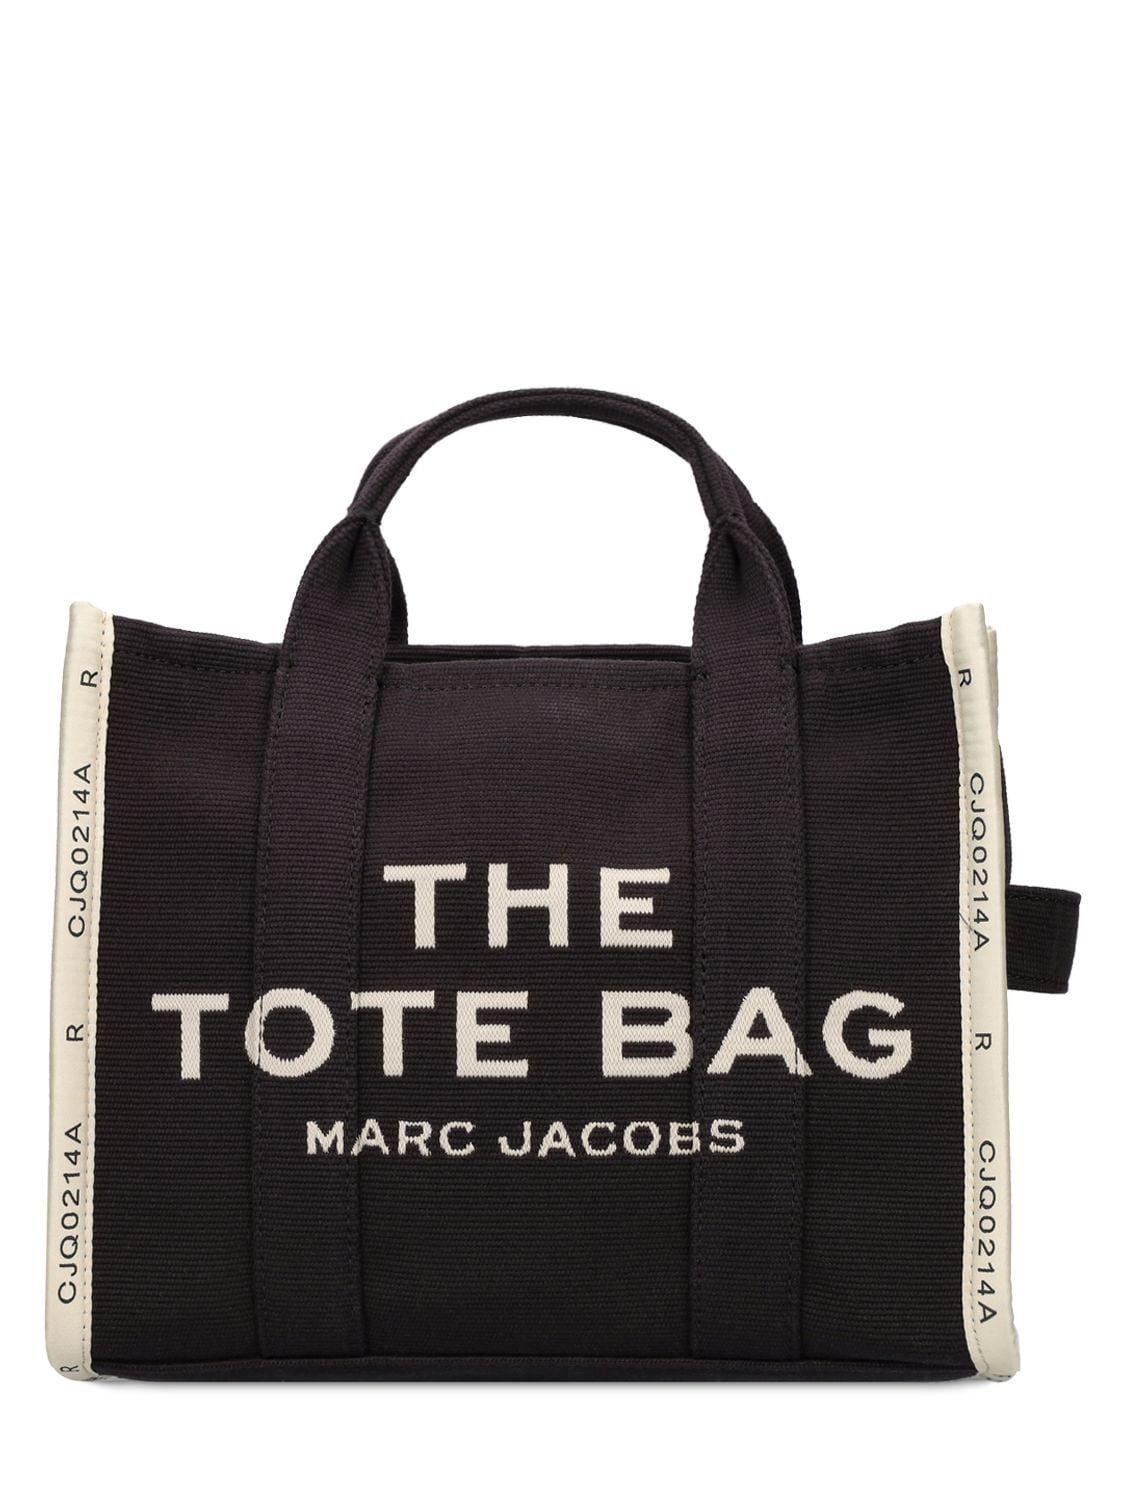 Marc Jacobs The Medium Tote Cotton Jacquard Bag in Black | Lyst